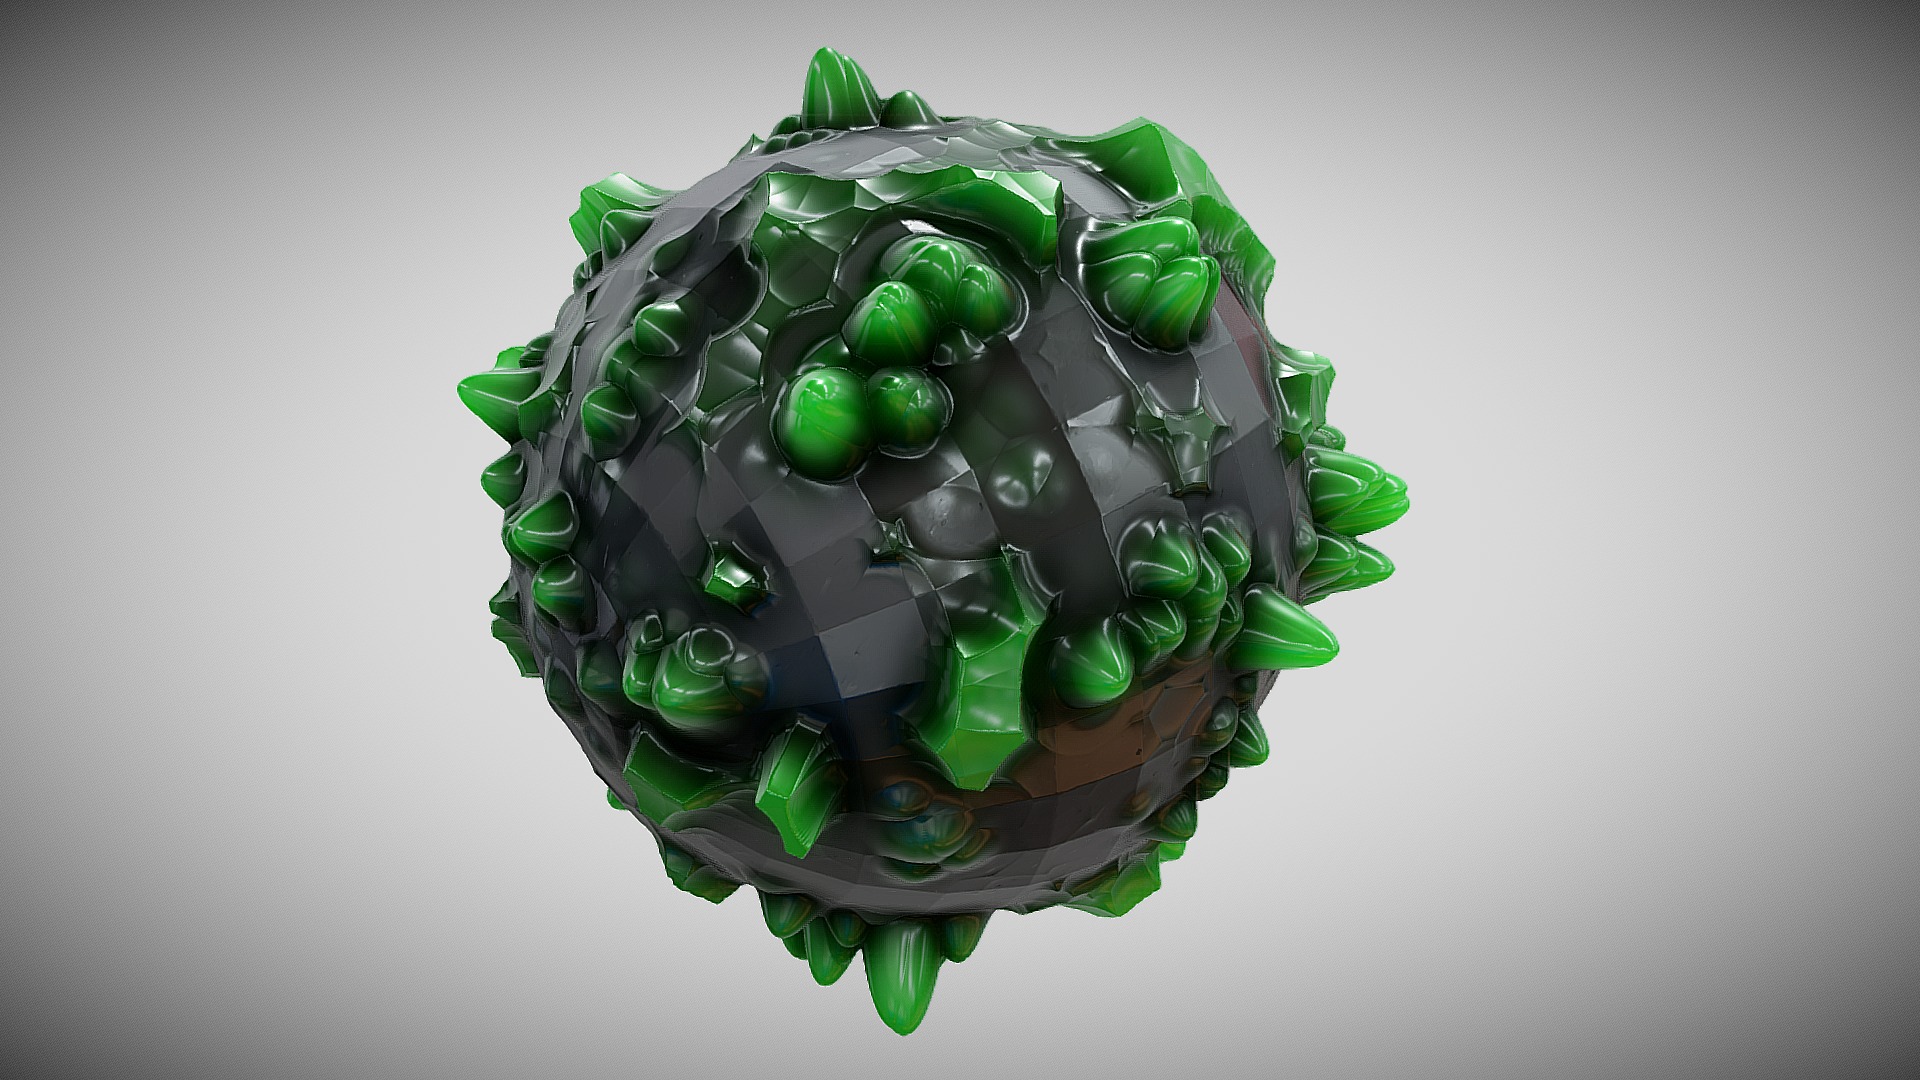 3D model Alien Rock 6 with facets - This is a 3D model of the Alien Rock 6 with facets. The 3D model is about a green and white toy.